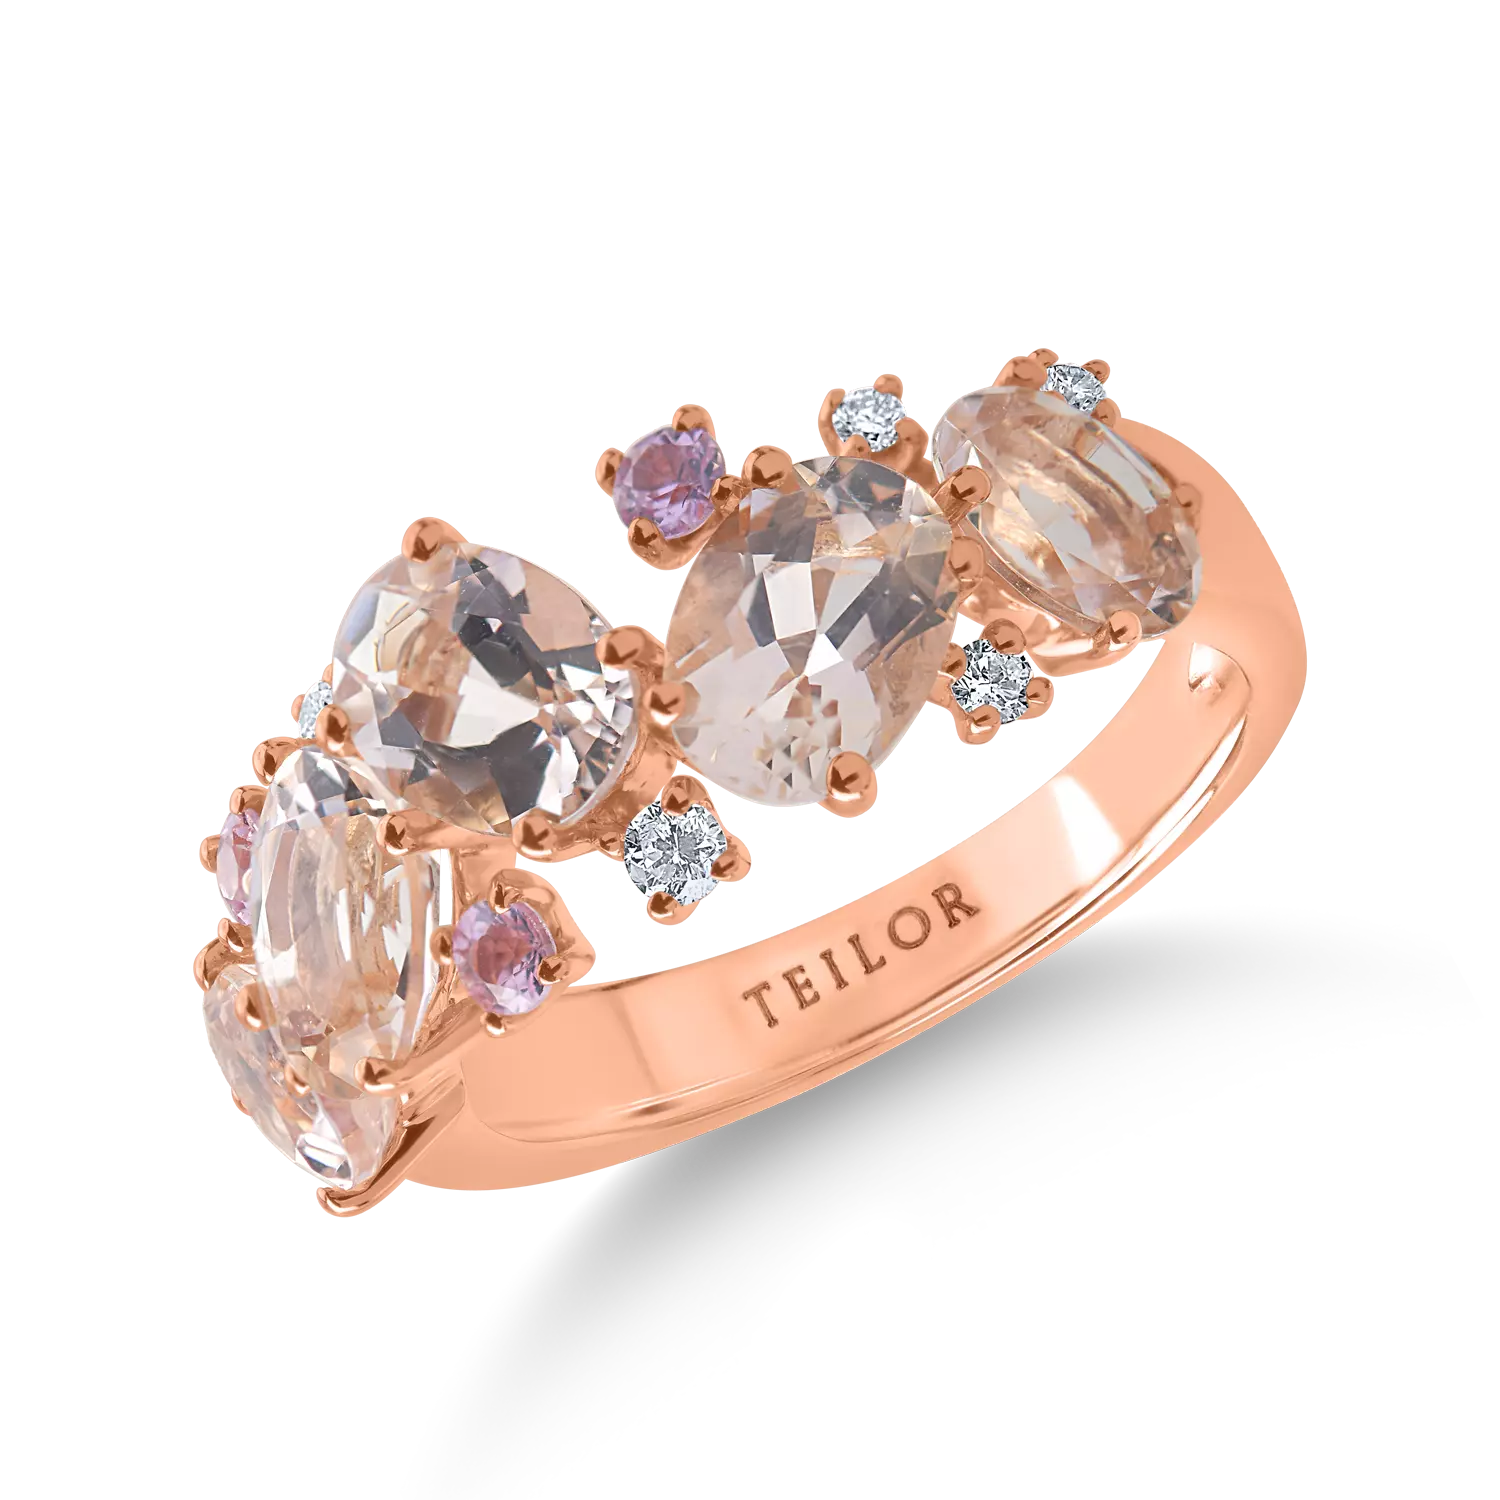 Rose gold ring with 3.3ct precious and semi-precious stones